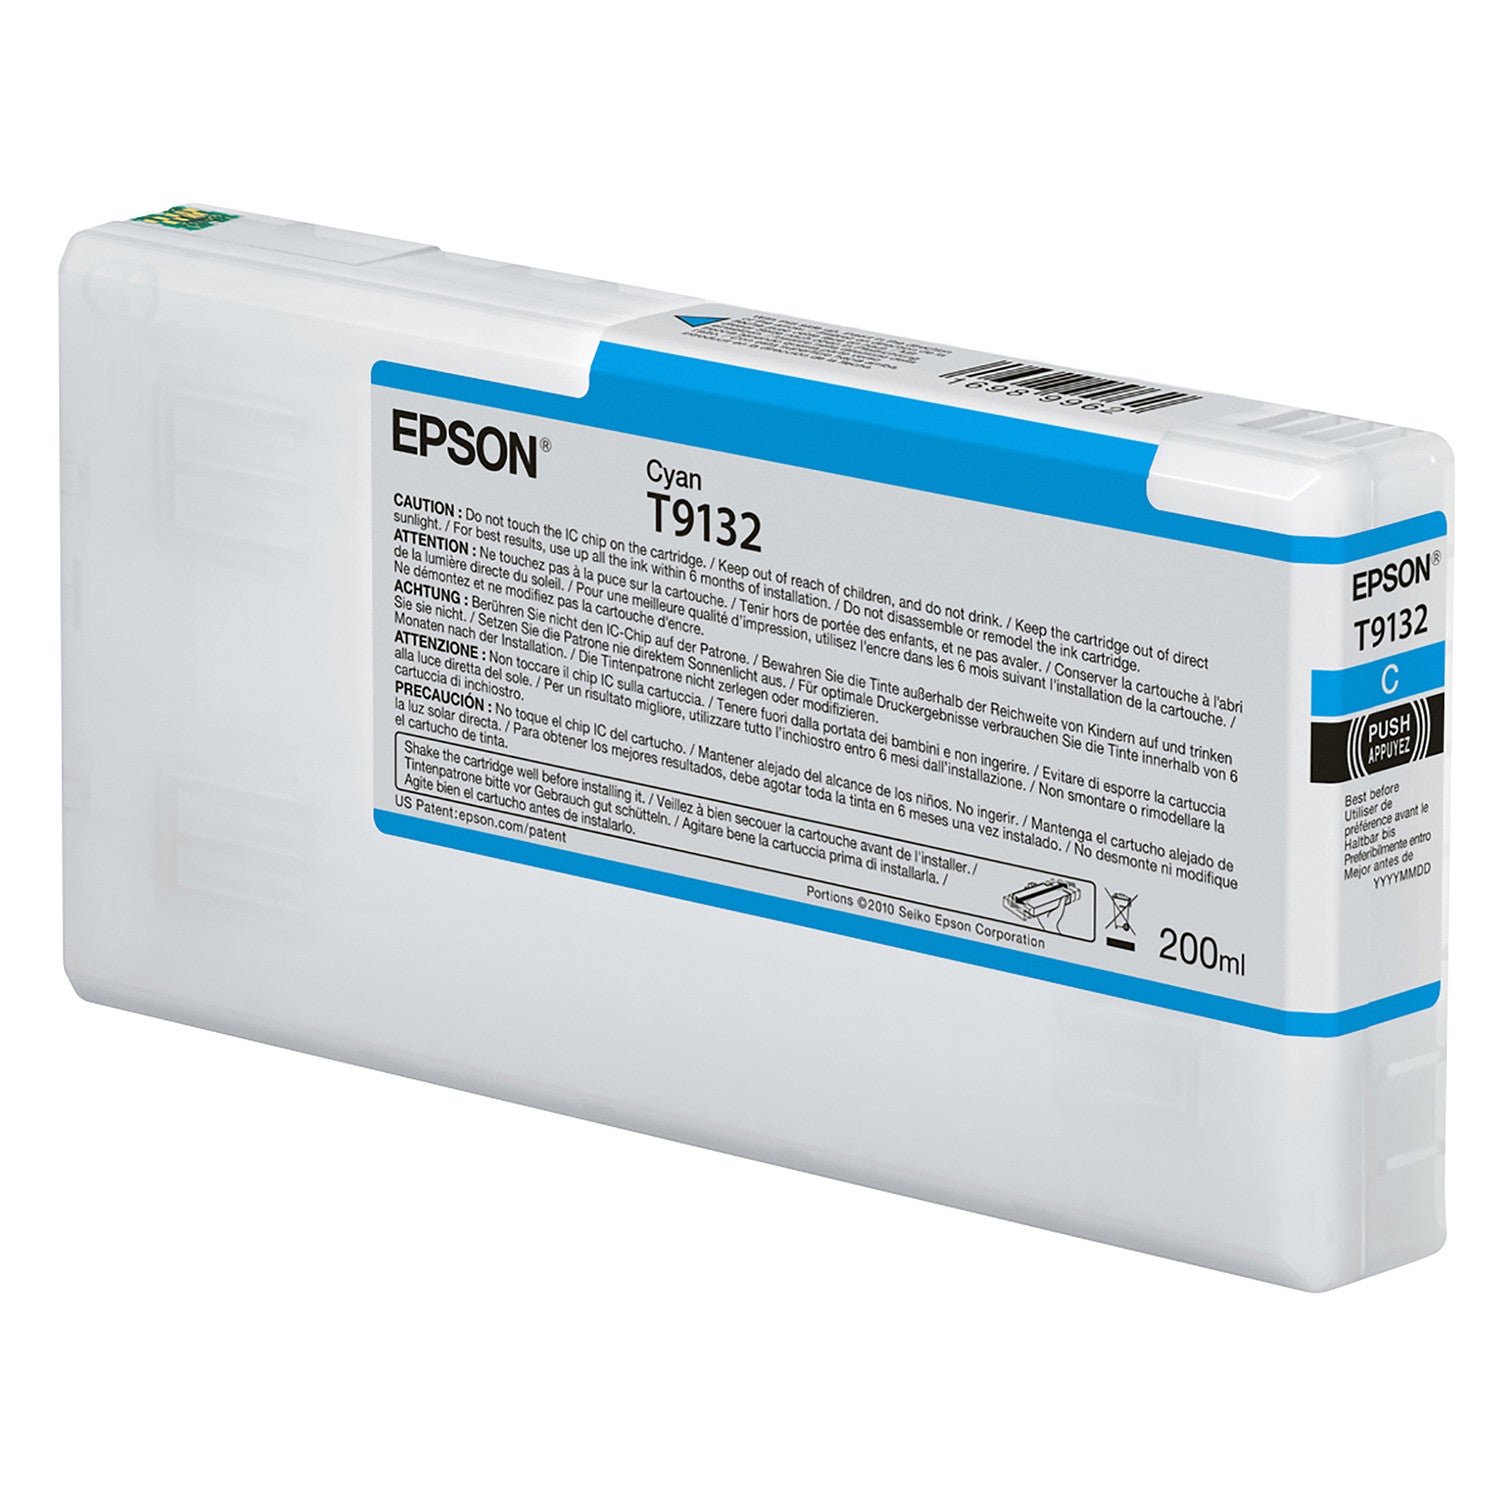 Epson T913200 P5000 Ultrachrome HD Ink 200ml Cyan, papers printer ink, Epson - Pictureline 